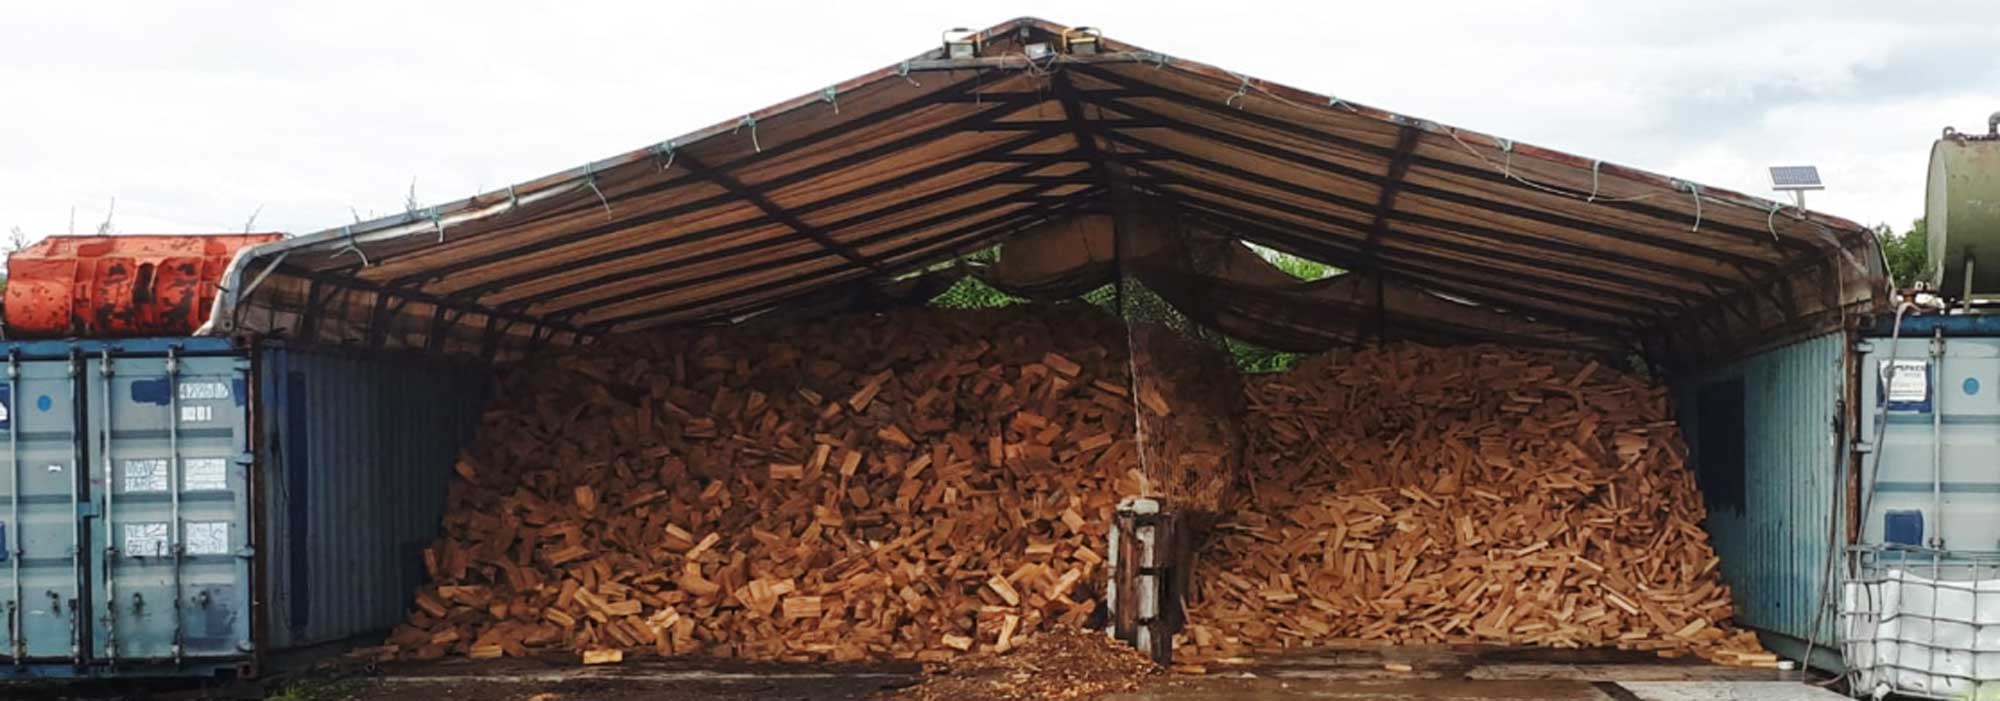 Firewood kept well ventilated and dry